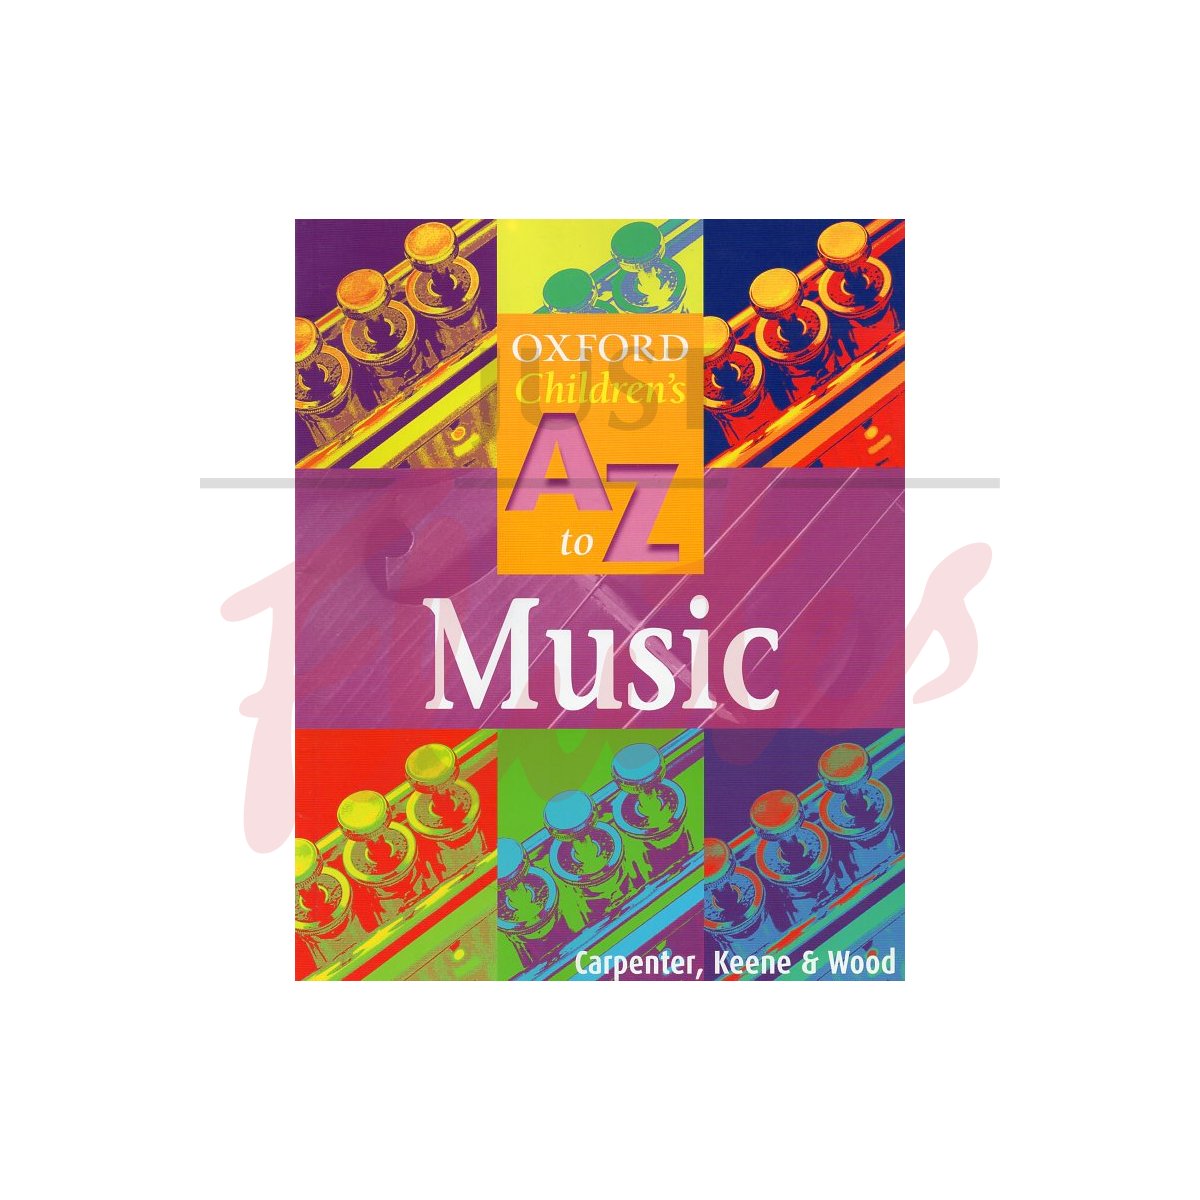 Oxford Children's A to Z Music